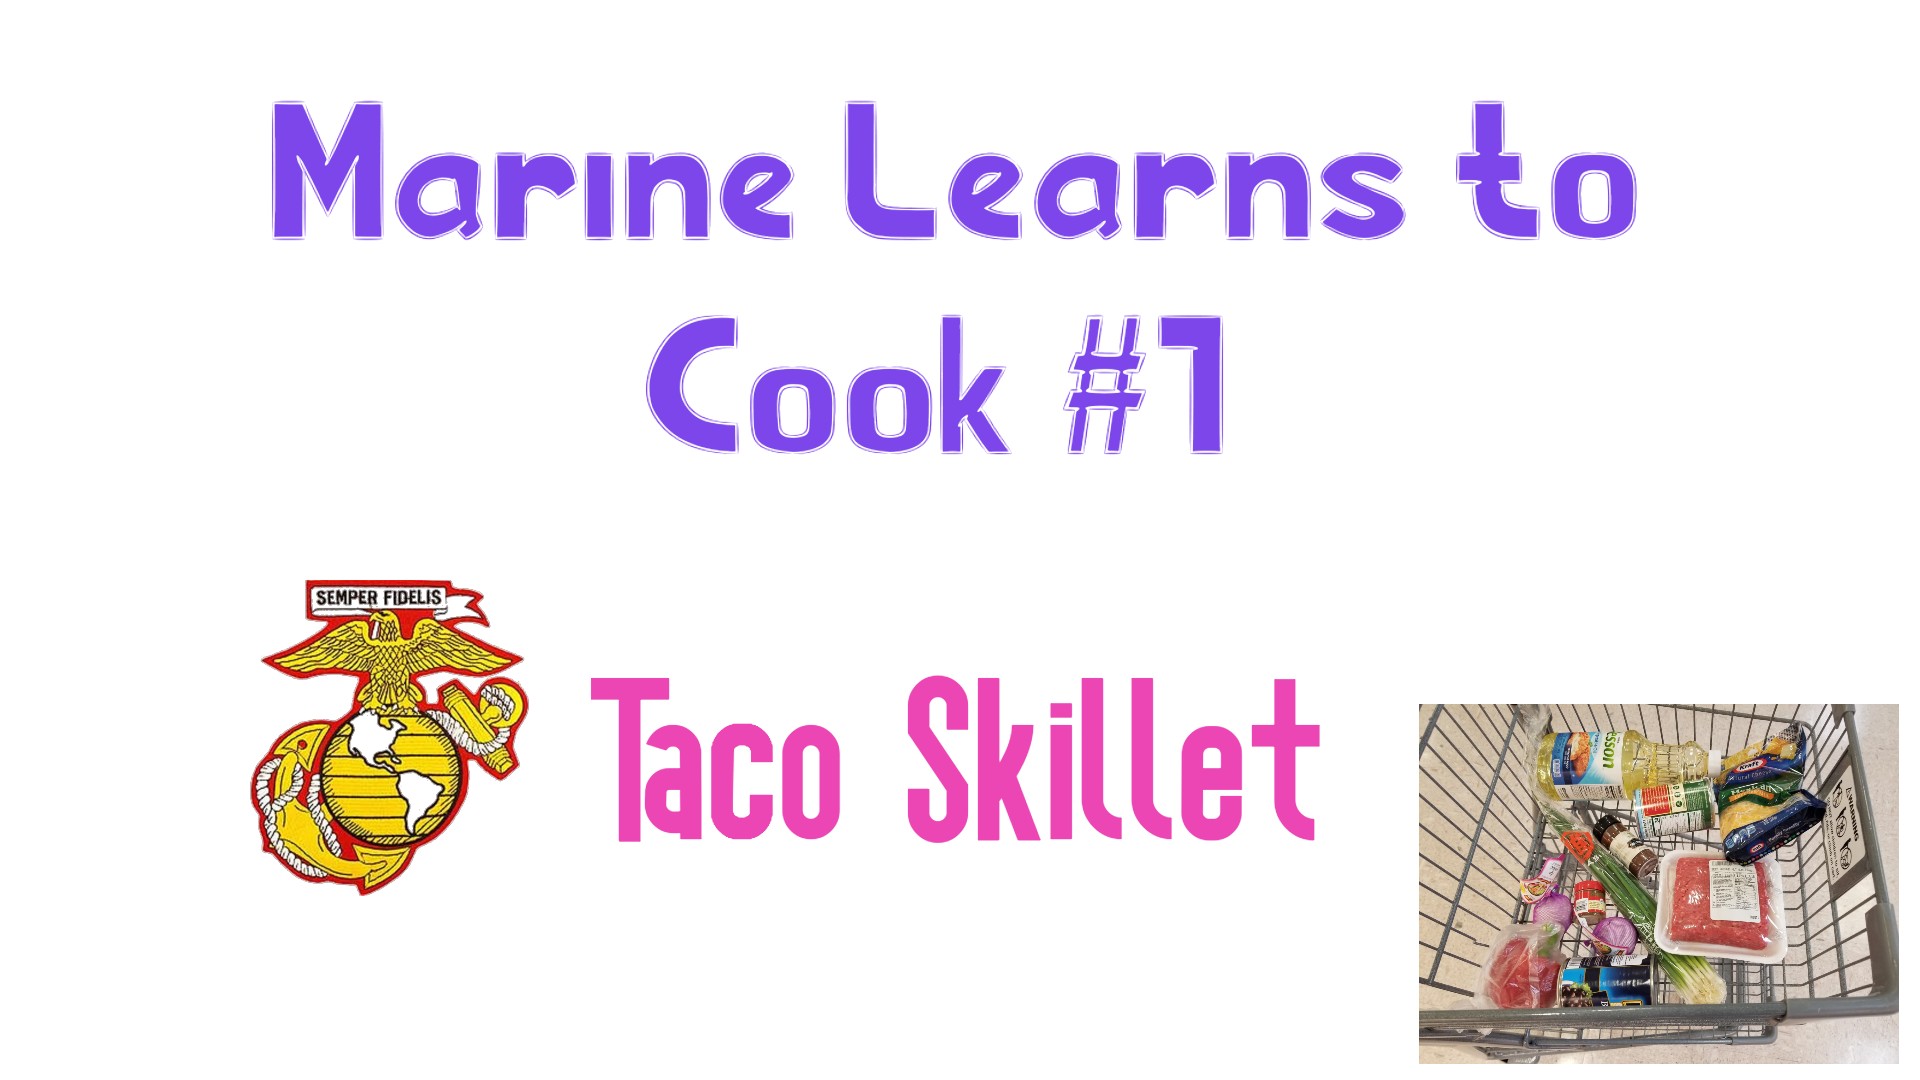 Marine Learns to Cook #1